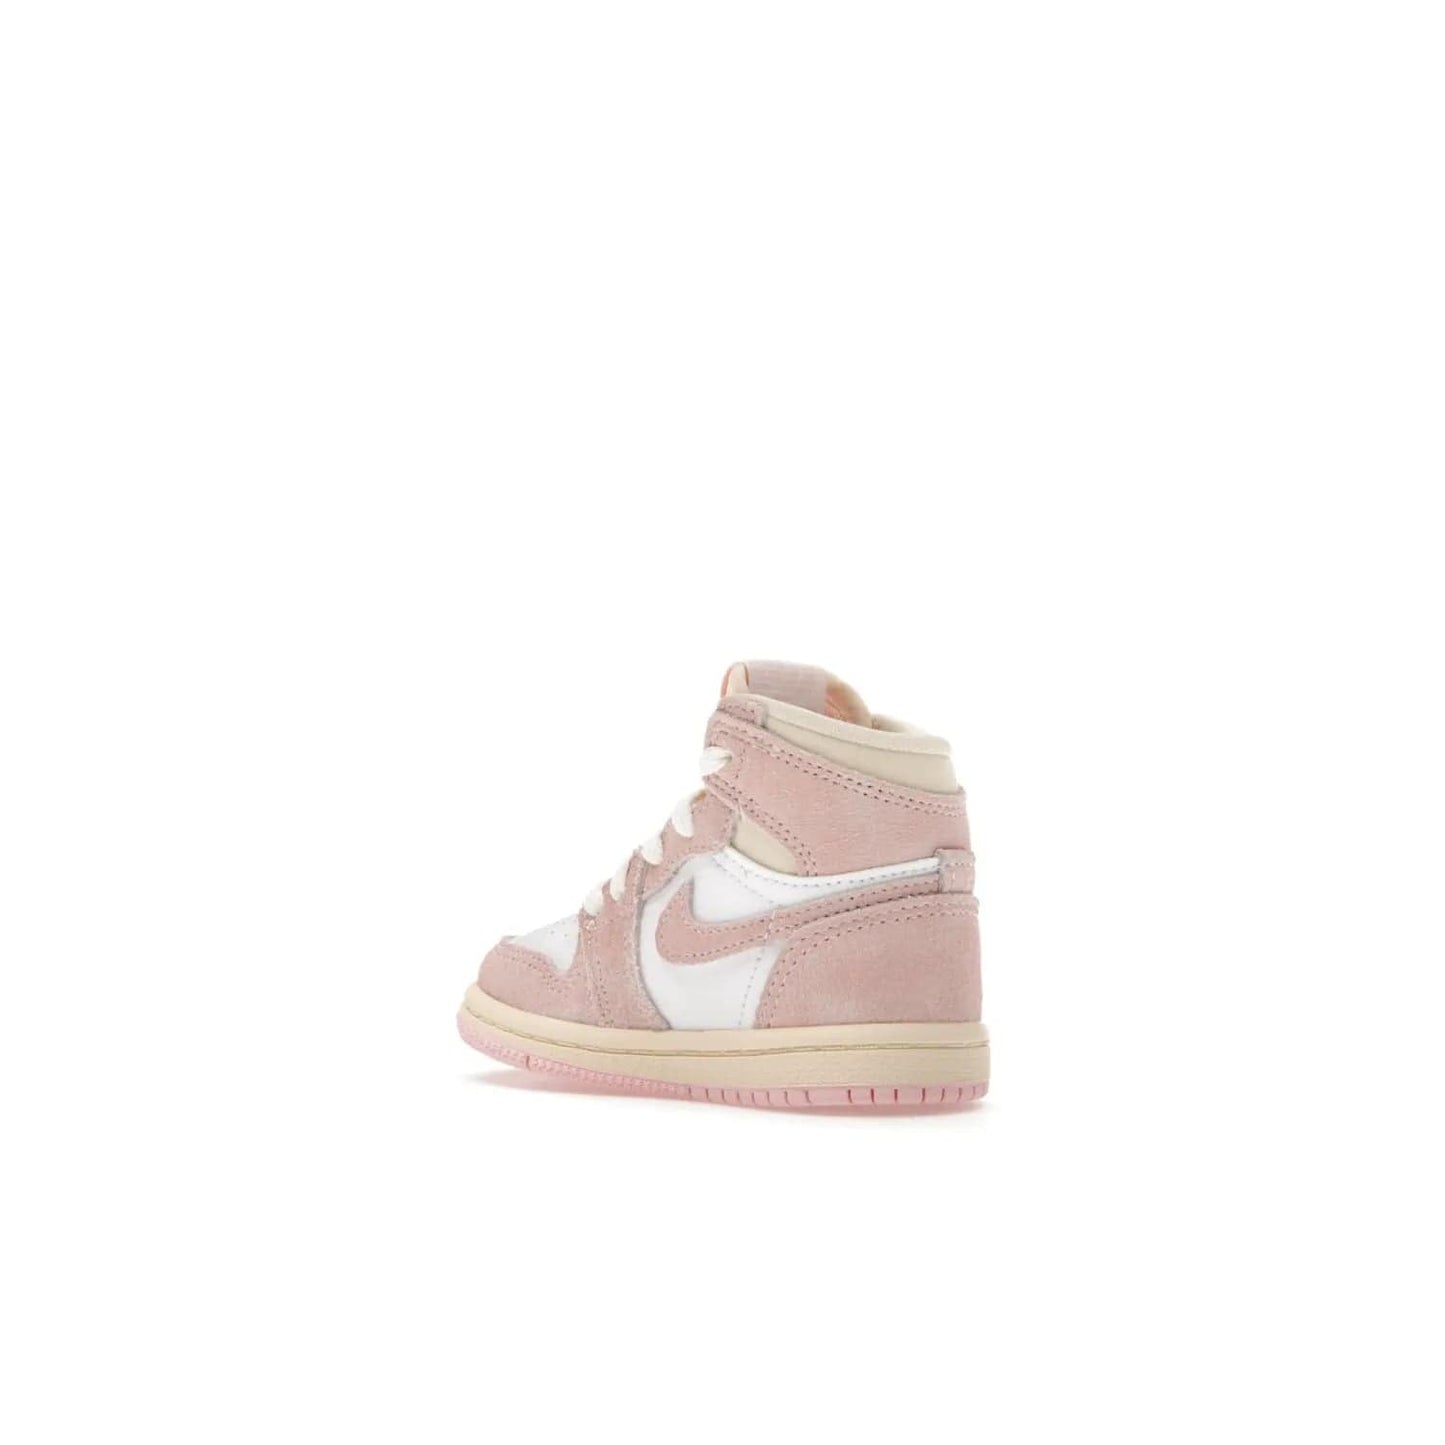 Jordan 1 Retro High OG Washed Pink (TD) - Image 23 - Only at www.BallersClubKickz.com - Retro style meets modern comfort: Introducing the Jordan 1 High OG Washed Pink (TD). Combining Atmosphere/White/Muslin/Sail colors with a high-rise silhouette, these shoes will be an instant classic when they release April 22, 2023.